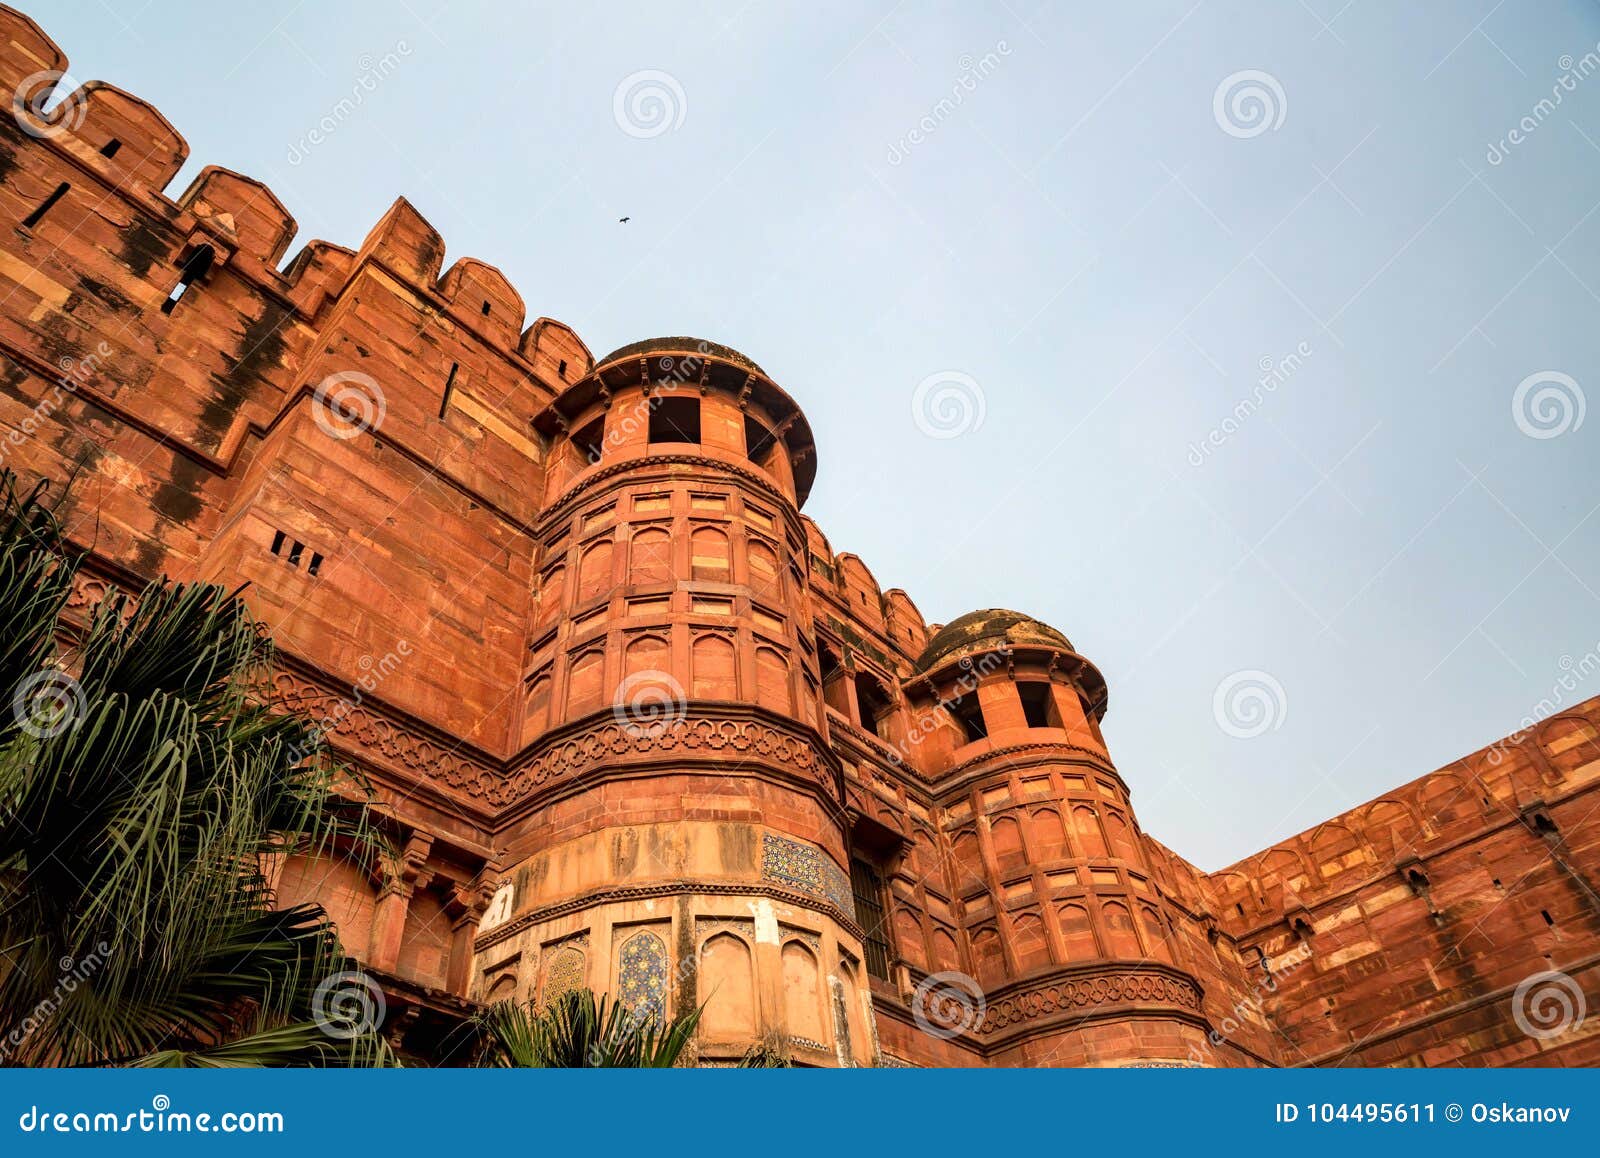 Red Fort Situated In Agra India Stock Image Image Of Castle